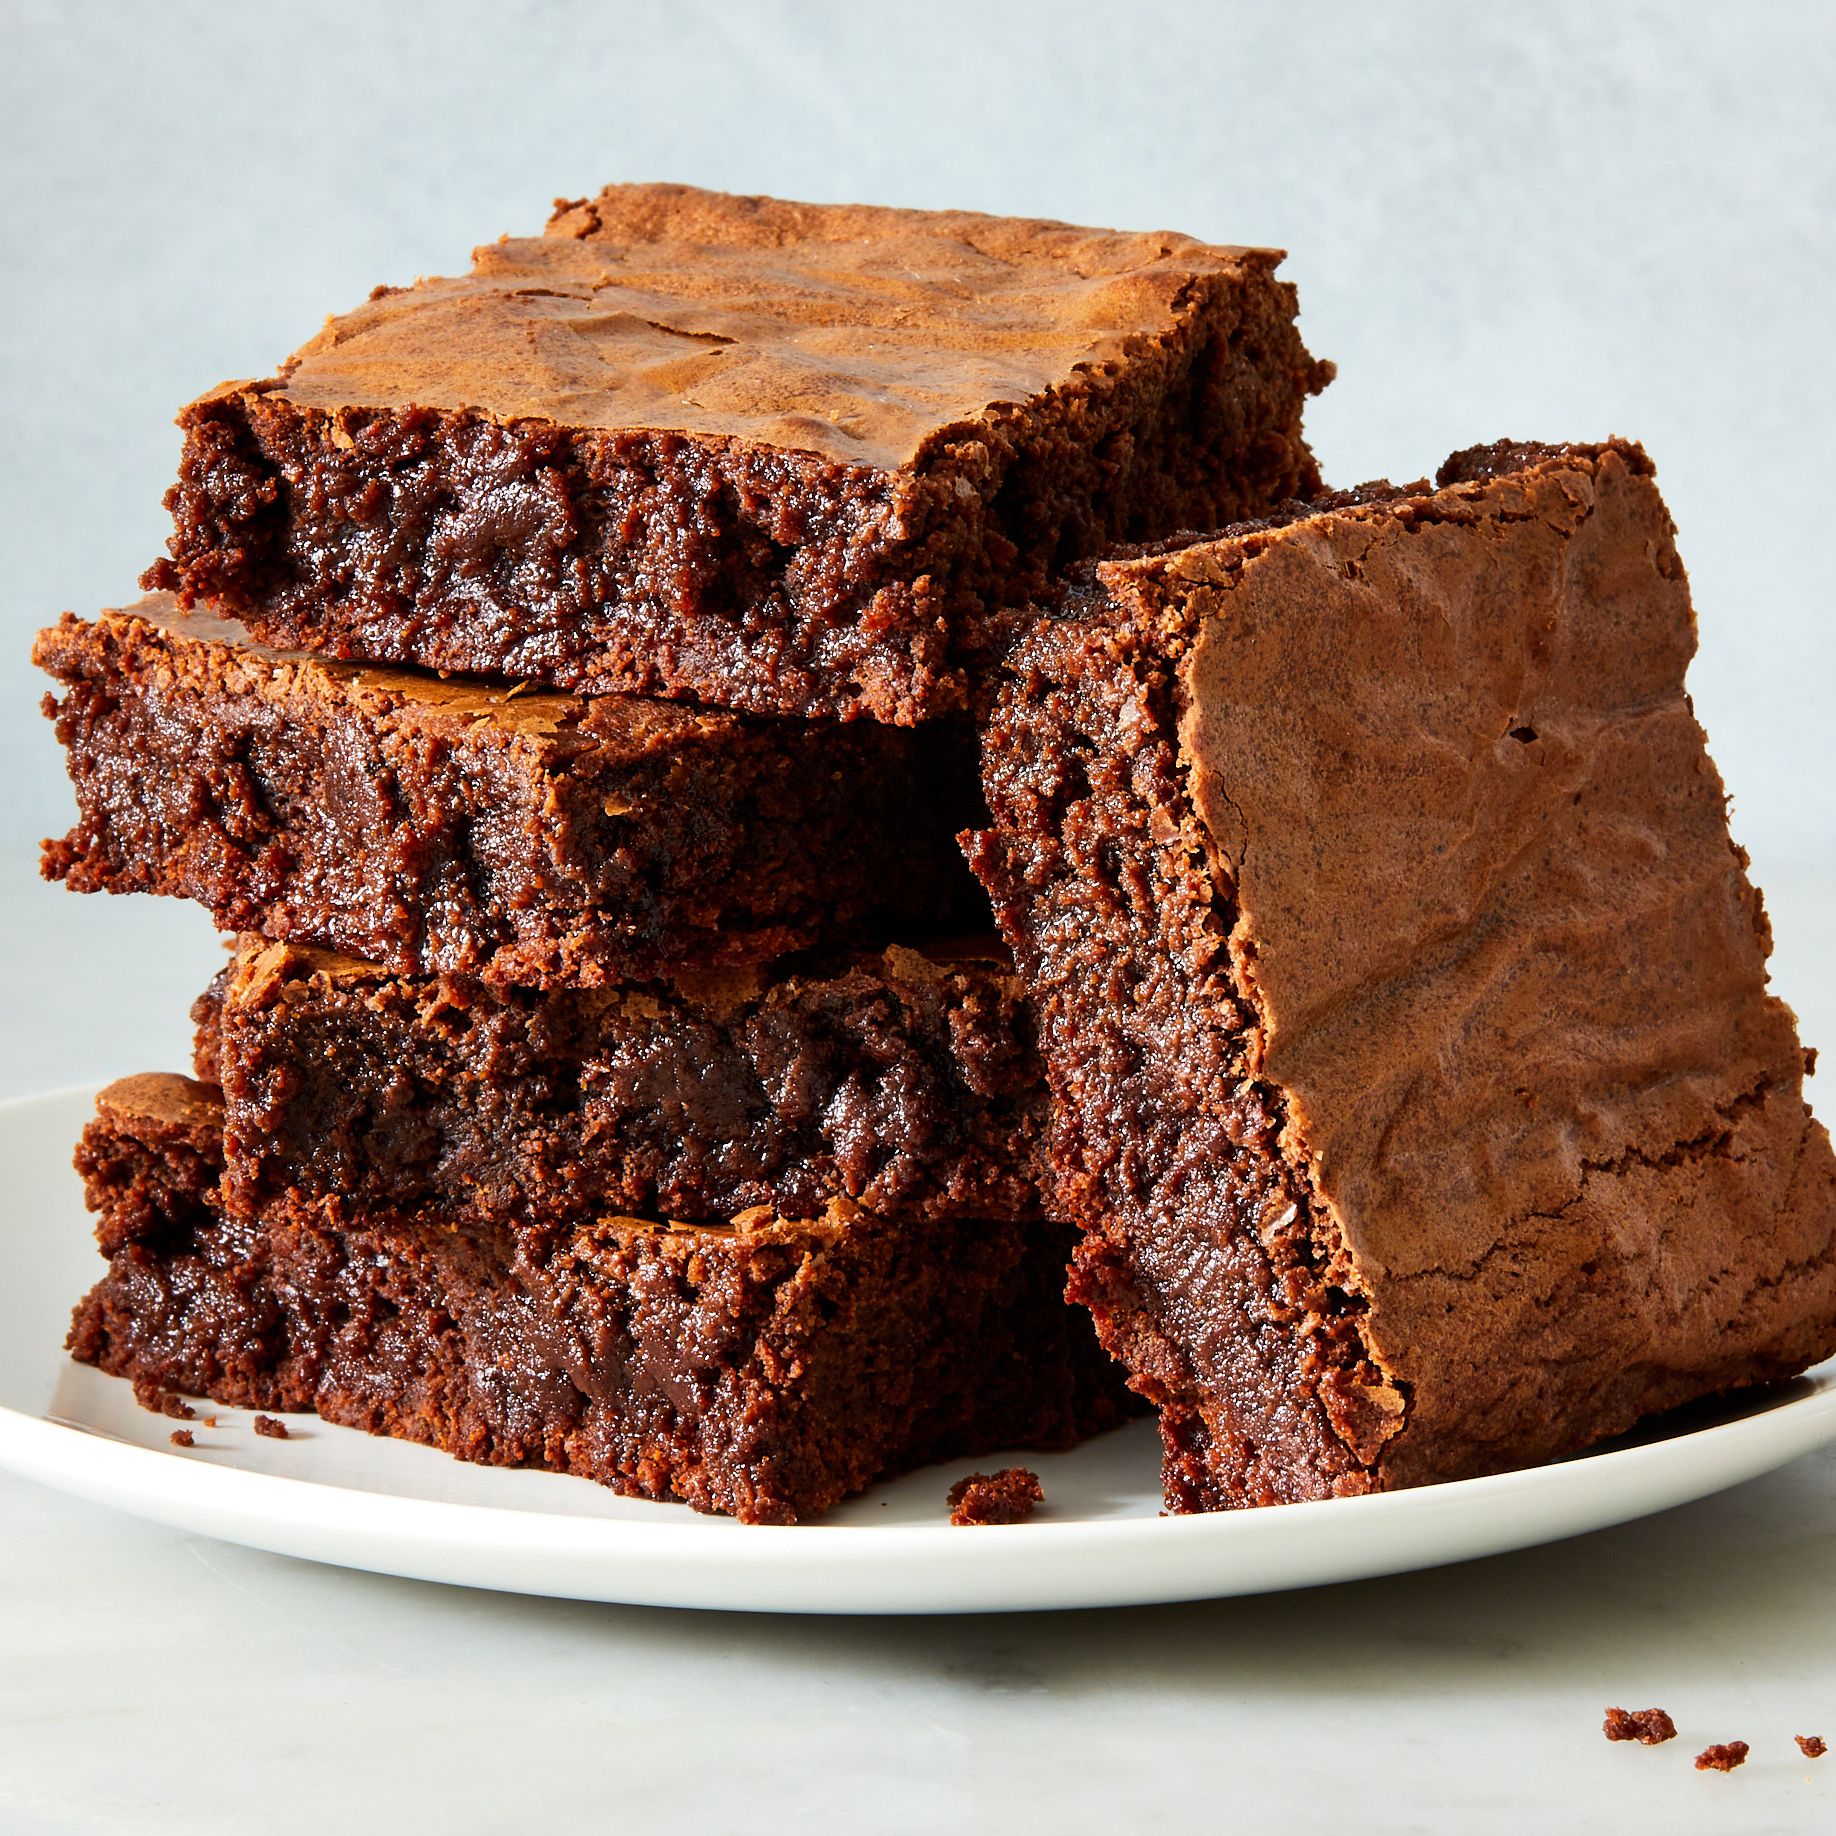 Brownie Deals ➡️ Get Cheapest Price, Sales